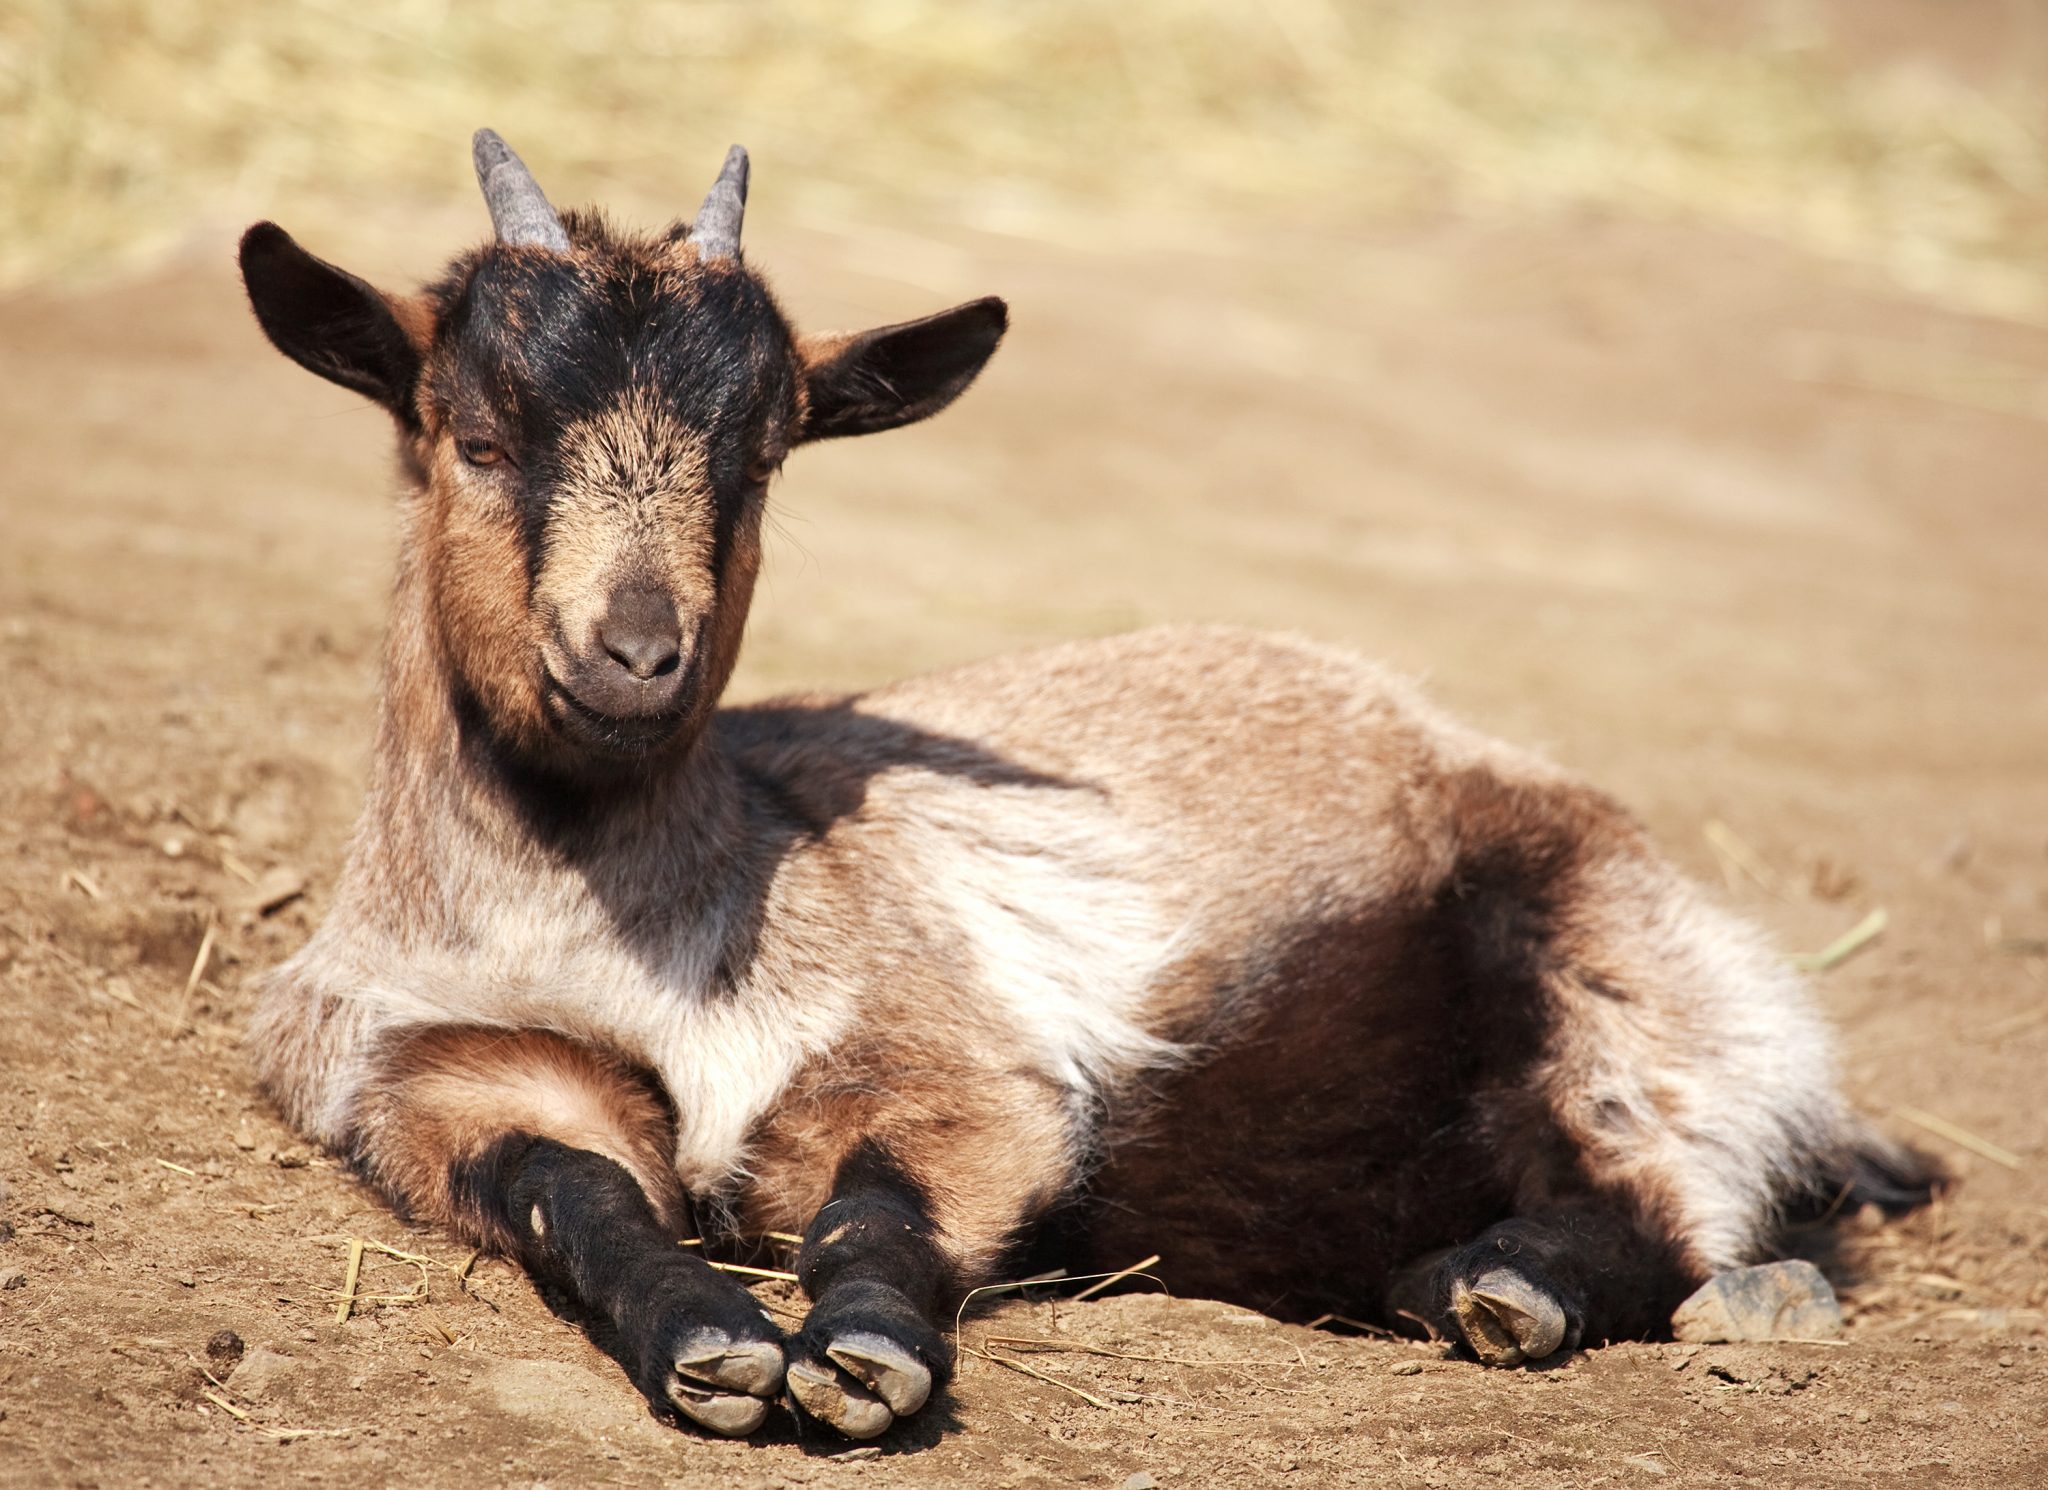 A goat kid laying on the ground.